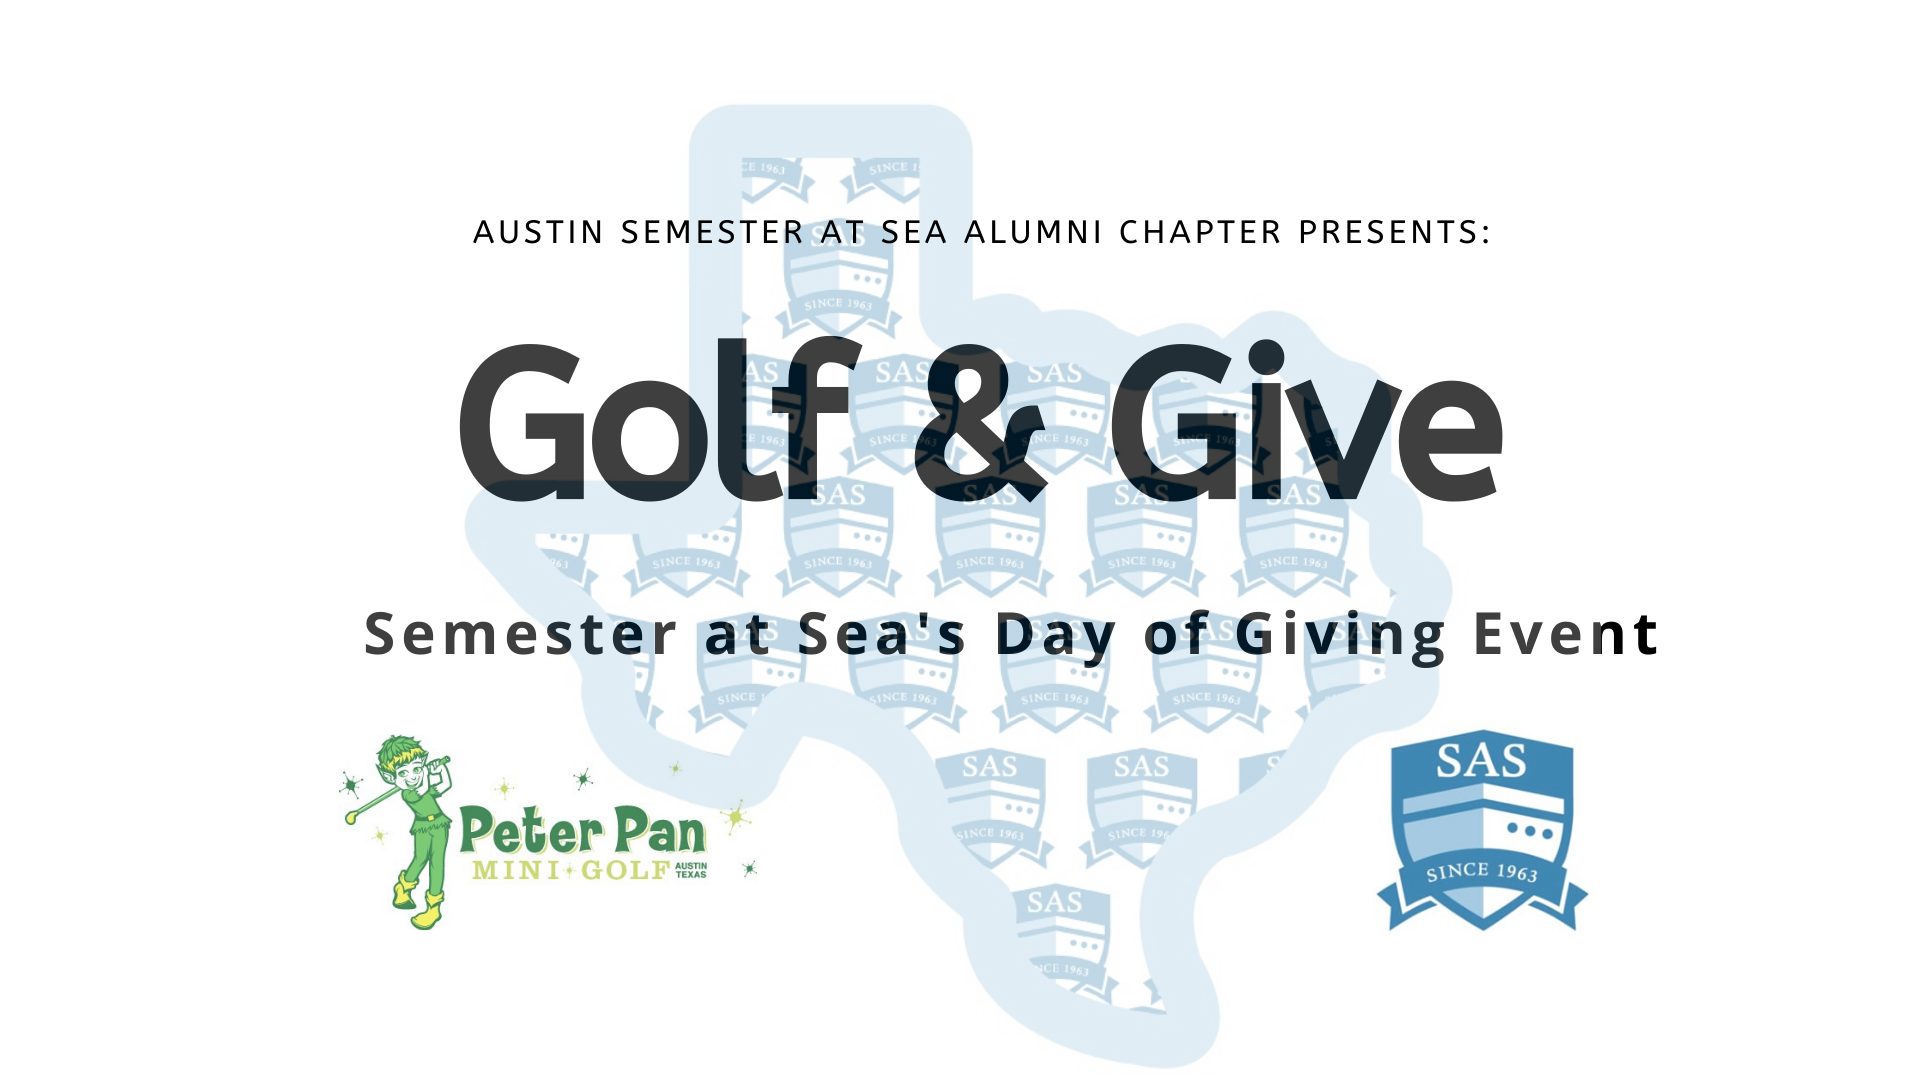 Golf & Give: Austin SAS Alumni Chapter's Day of Giving Event